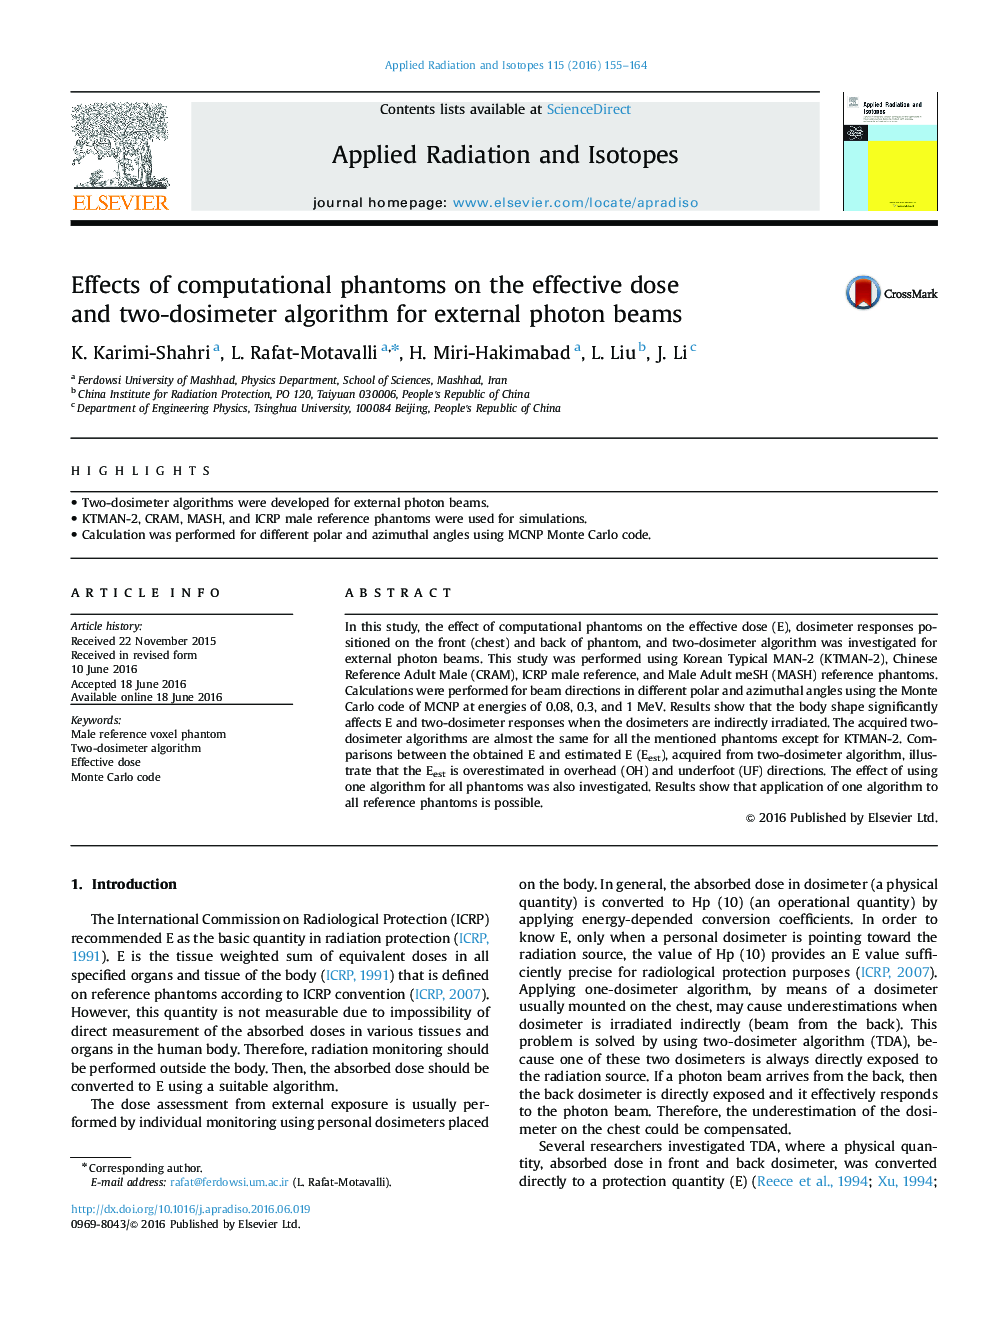 Effects of computational phantoms on the effective dose and two-dosimeter algorithm for external photon beams